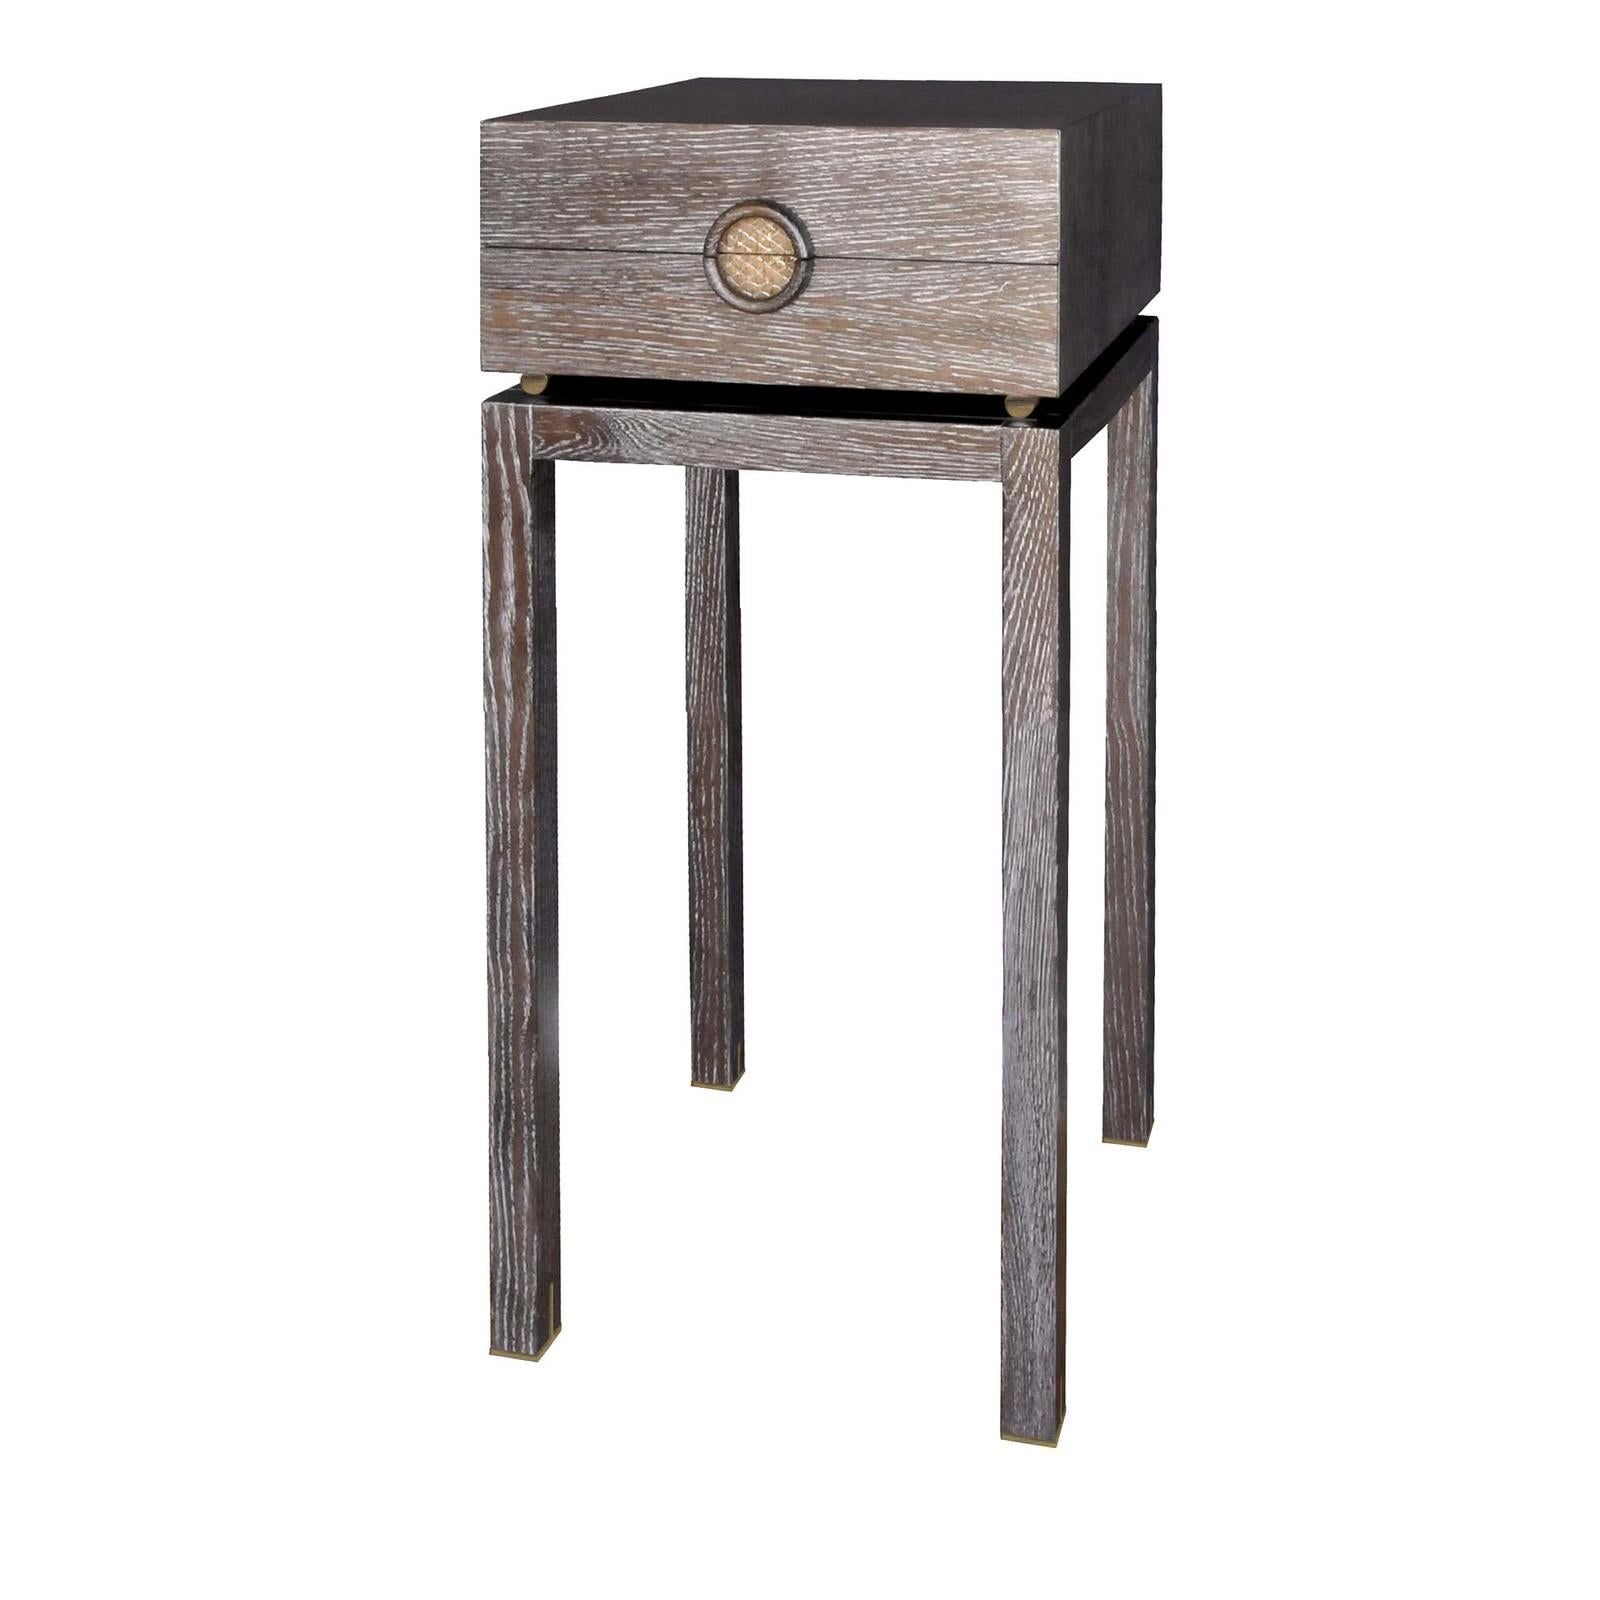 Either as a nightstand or sidled up beside a sofa, this tall table makes a stylish statement with its simple and sleek silhouette crafted of stained oak in silver and chocolate brown. Galvanized bronze spacers suspend the top from the four-legged